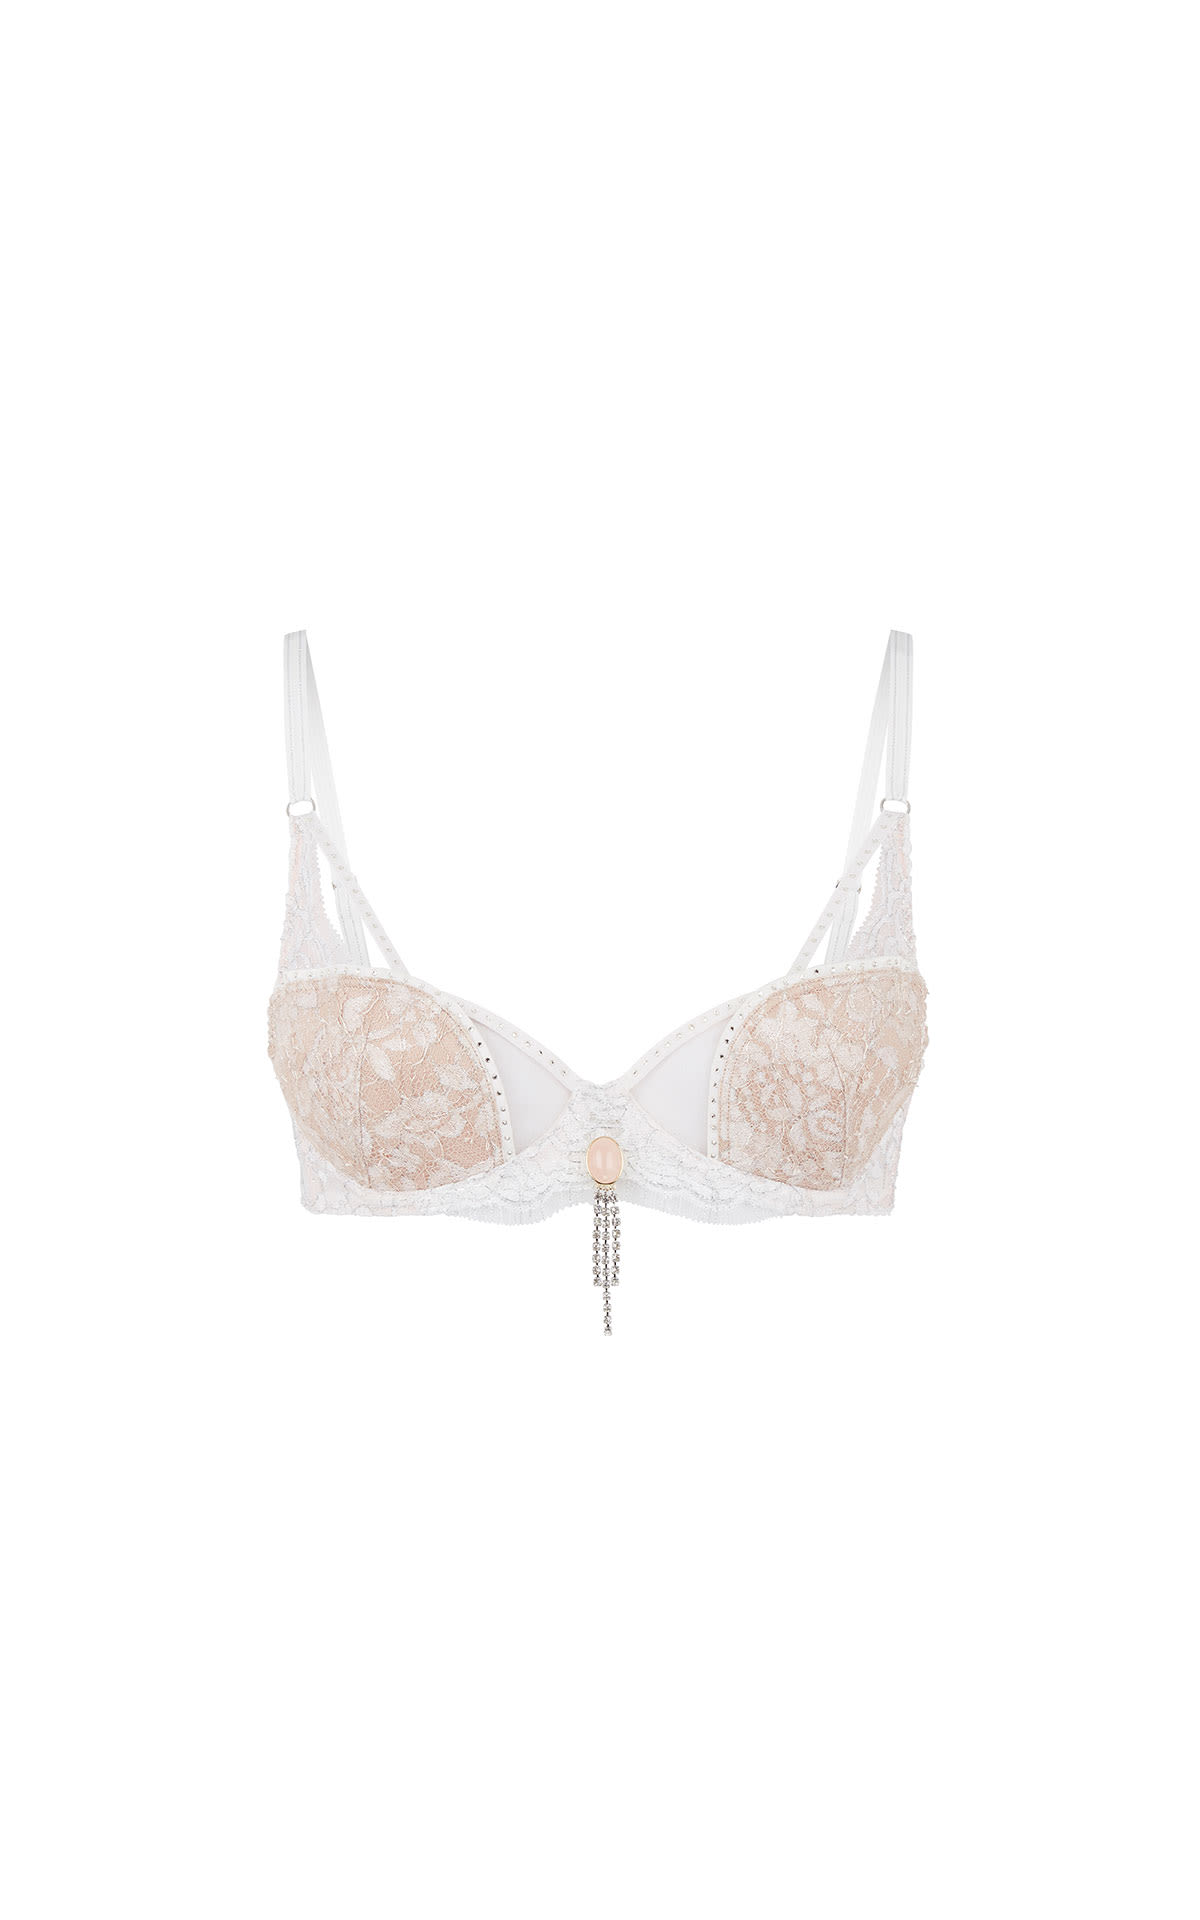 Agent Provocateur Presley bra blush and white from Bicester Village